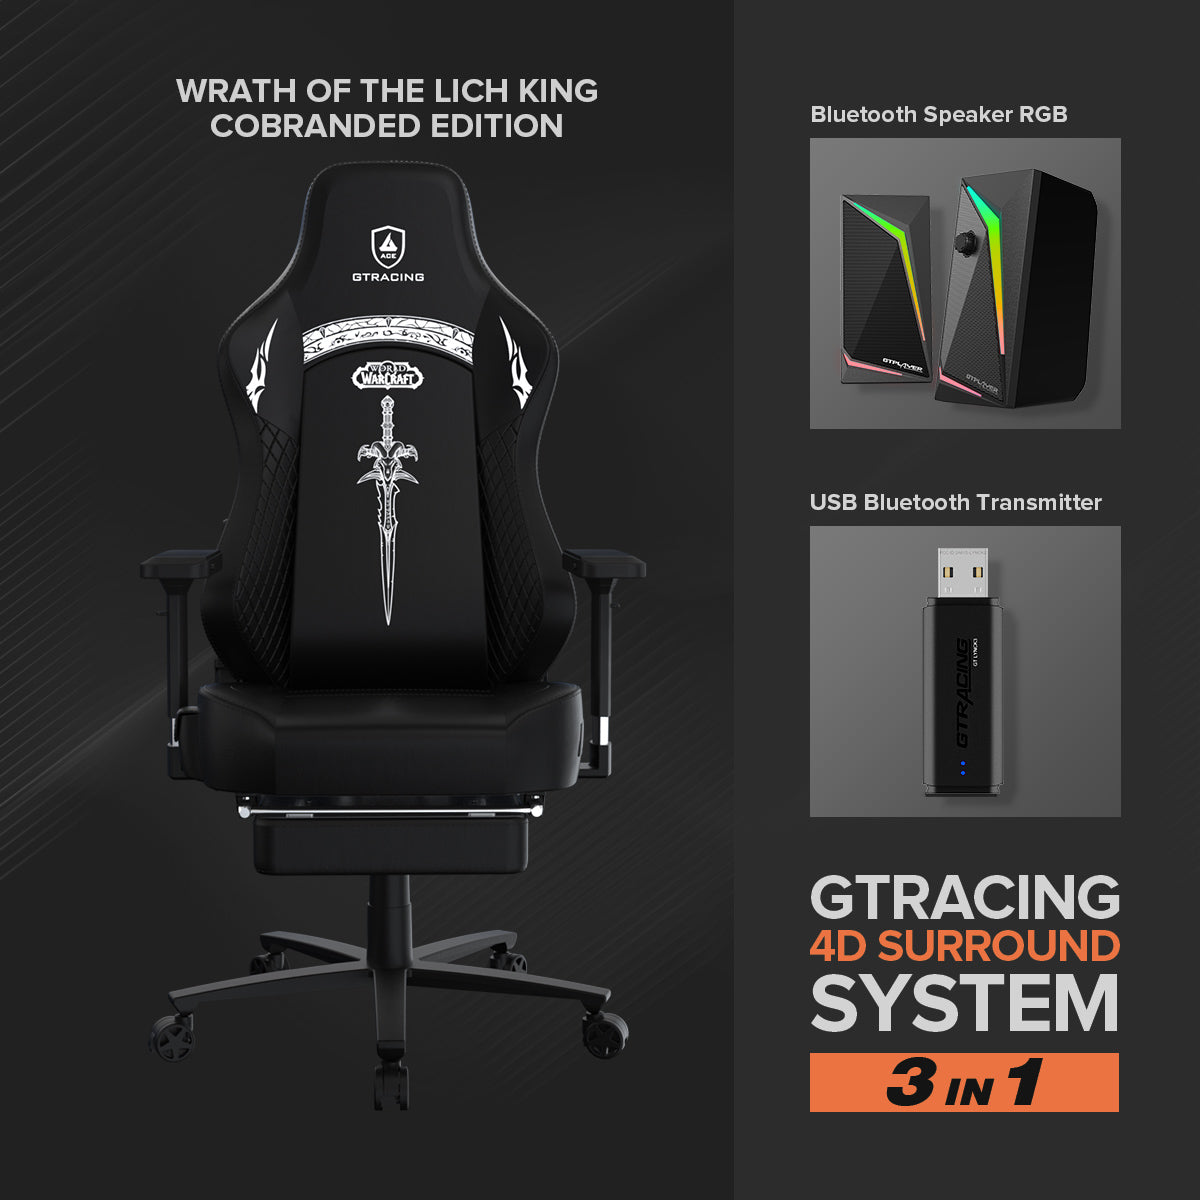 GTRACING 4D Surround System (WOTLK Edition, Bluetooth Speaker, and USB transmitter 3 in 1) - GTRACING